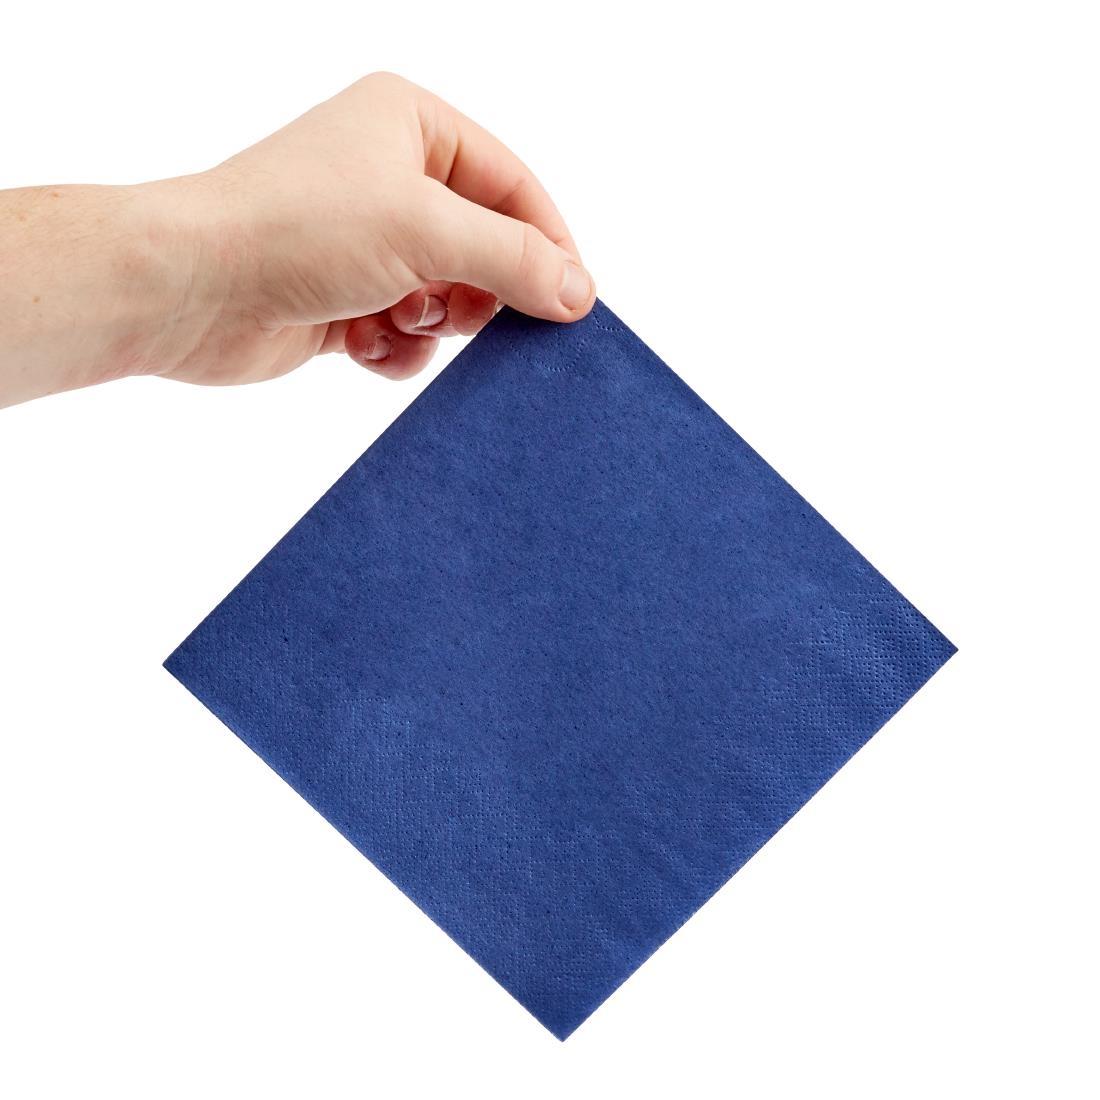 Fiesta Recyclable Lunch Napkin Blue 33x33cm 2ply 1/4 Fold (Pack of 2000) - FE224  - 3